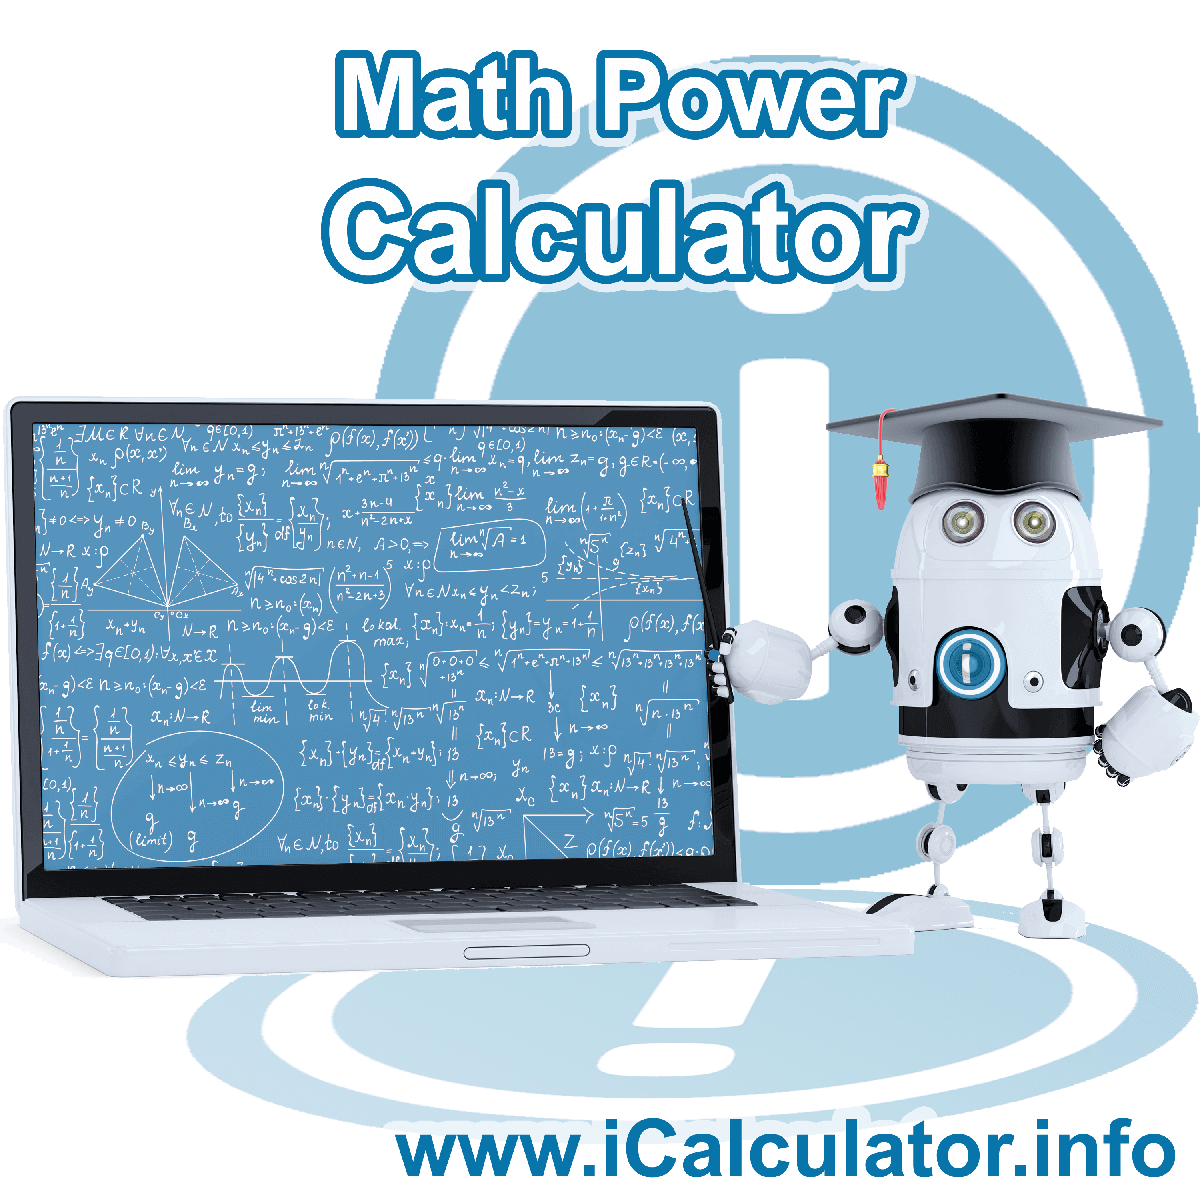 Mathematics Power Calculator. This image shows Math Power formula with associated calculations used by the Math Power Calculator